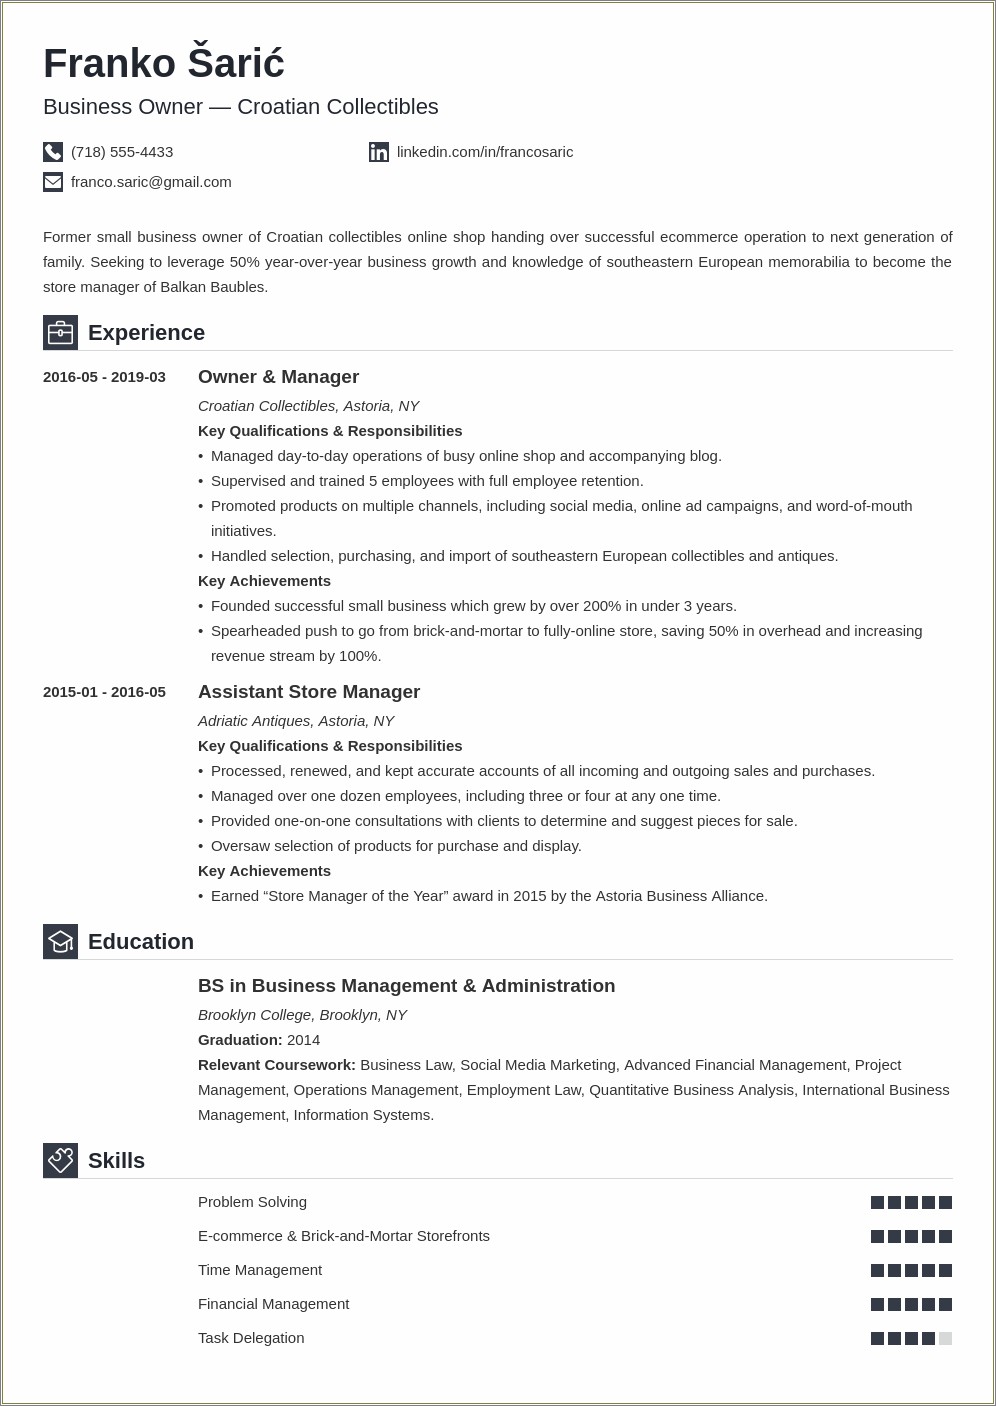 Sample Resumes Template For People.over 50